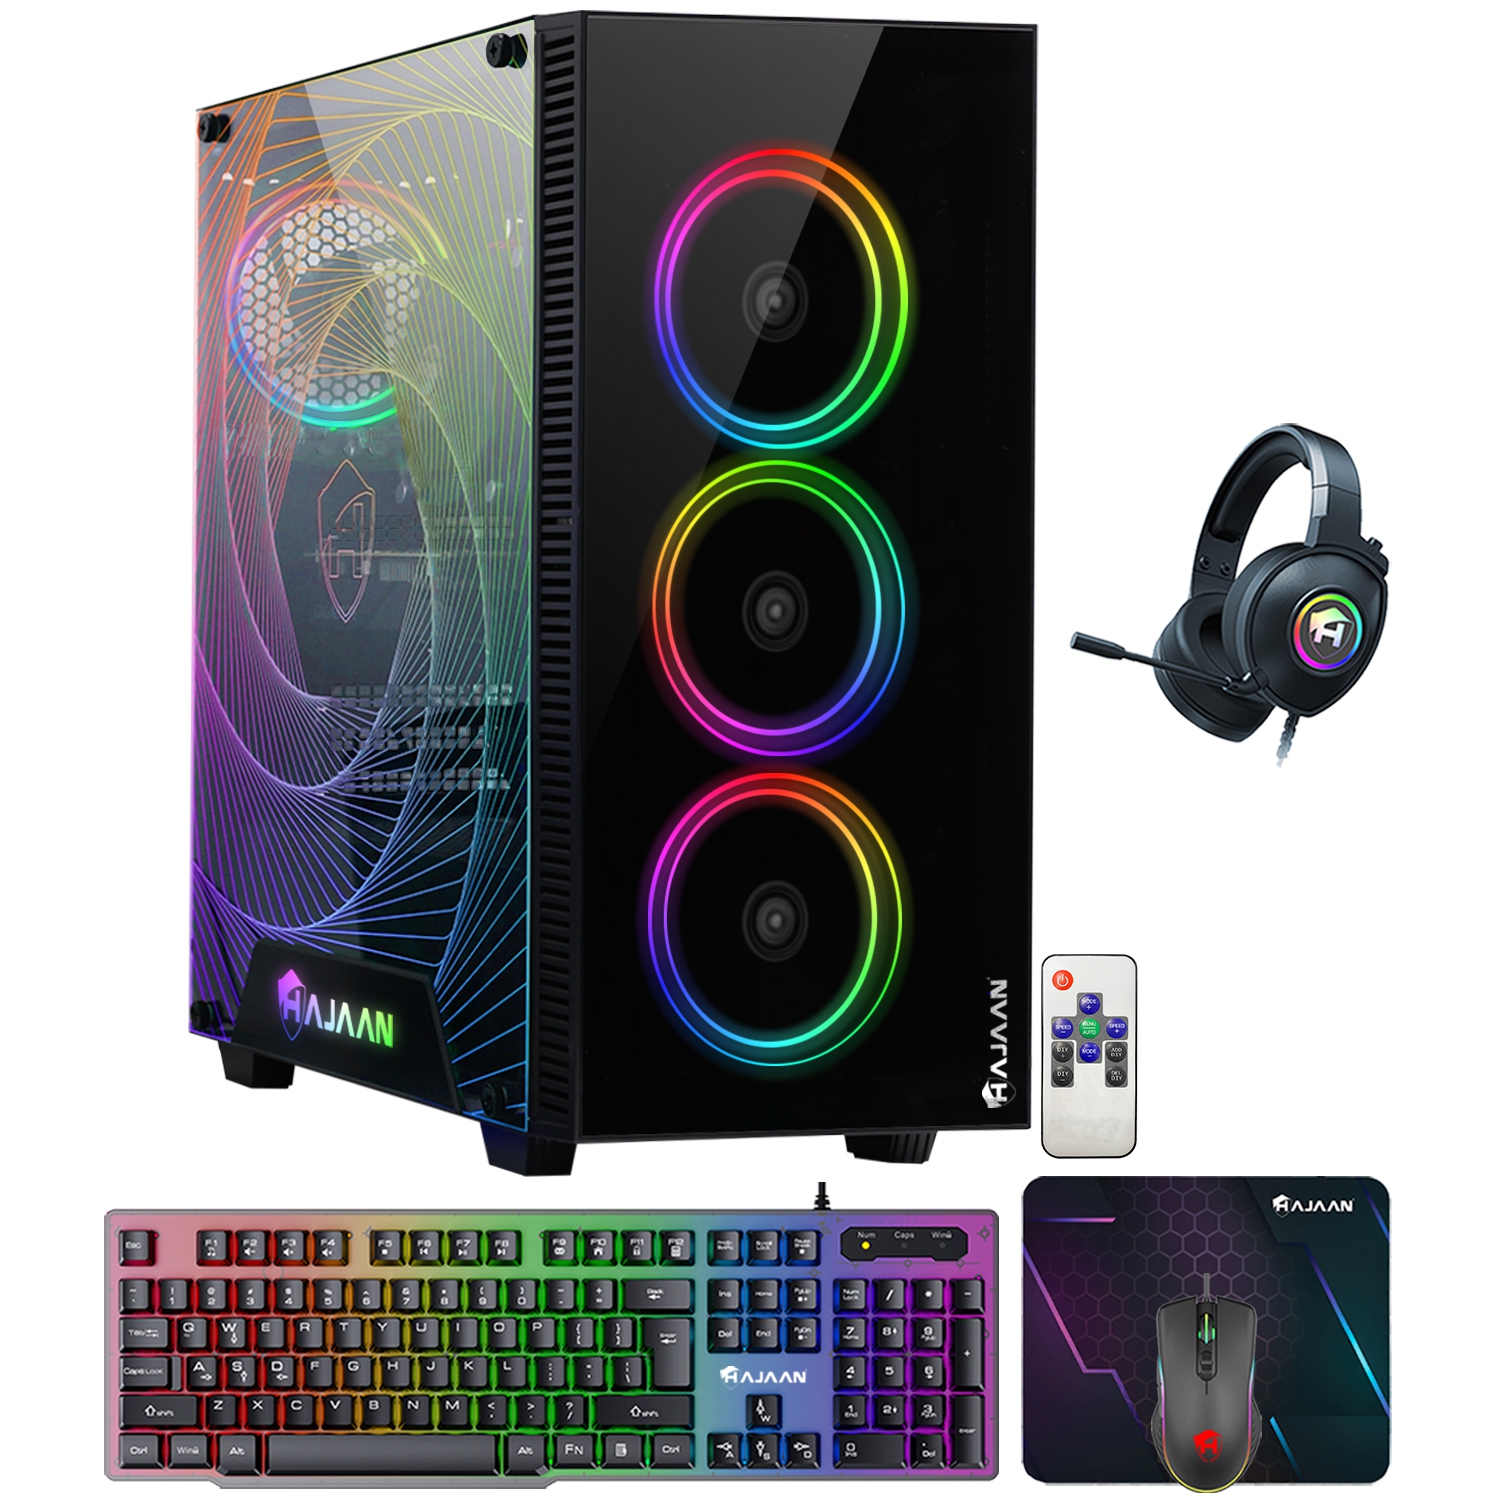 HAJAAN CYCLONIA Gaming Tower Computer Desktop PC - AMD Ryzen 7 5700G Processor Up to 4.6GHz - RTX 3060 12G GDDR6 - 16GB DDR4 - 1TB SSD - Windows 11 Pro - Keyboard Mouse and Headset